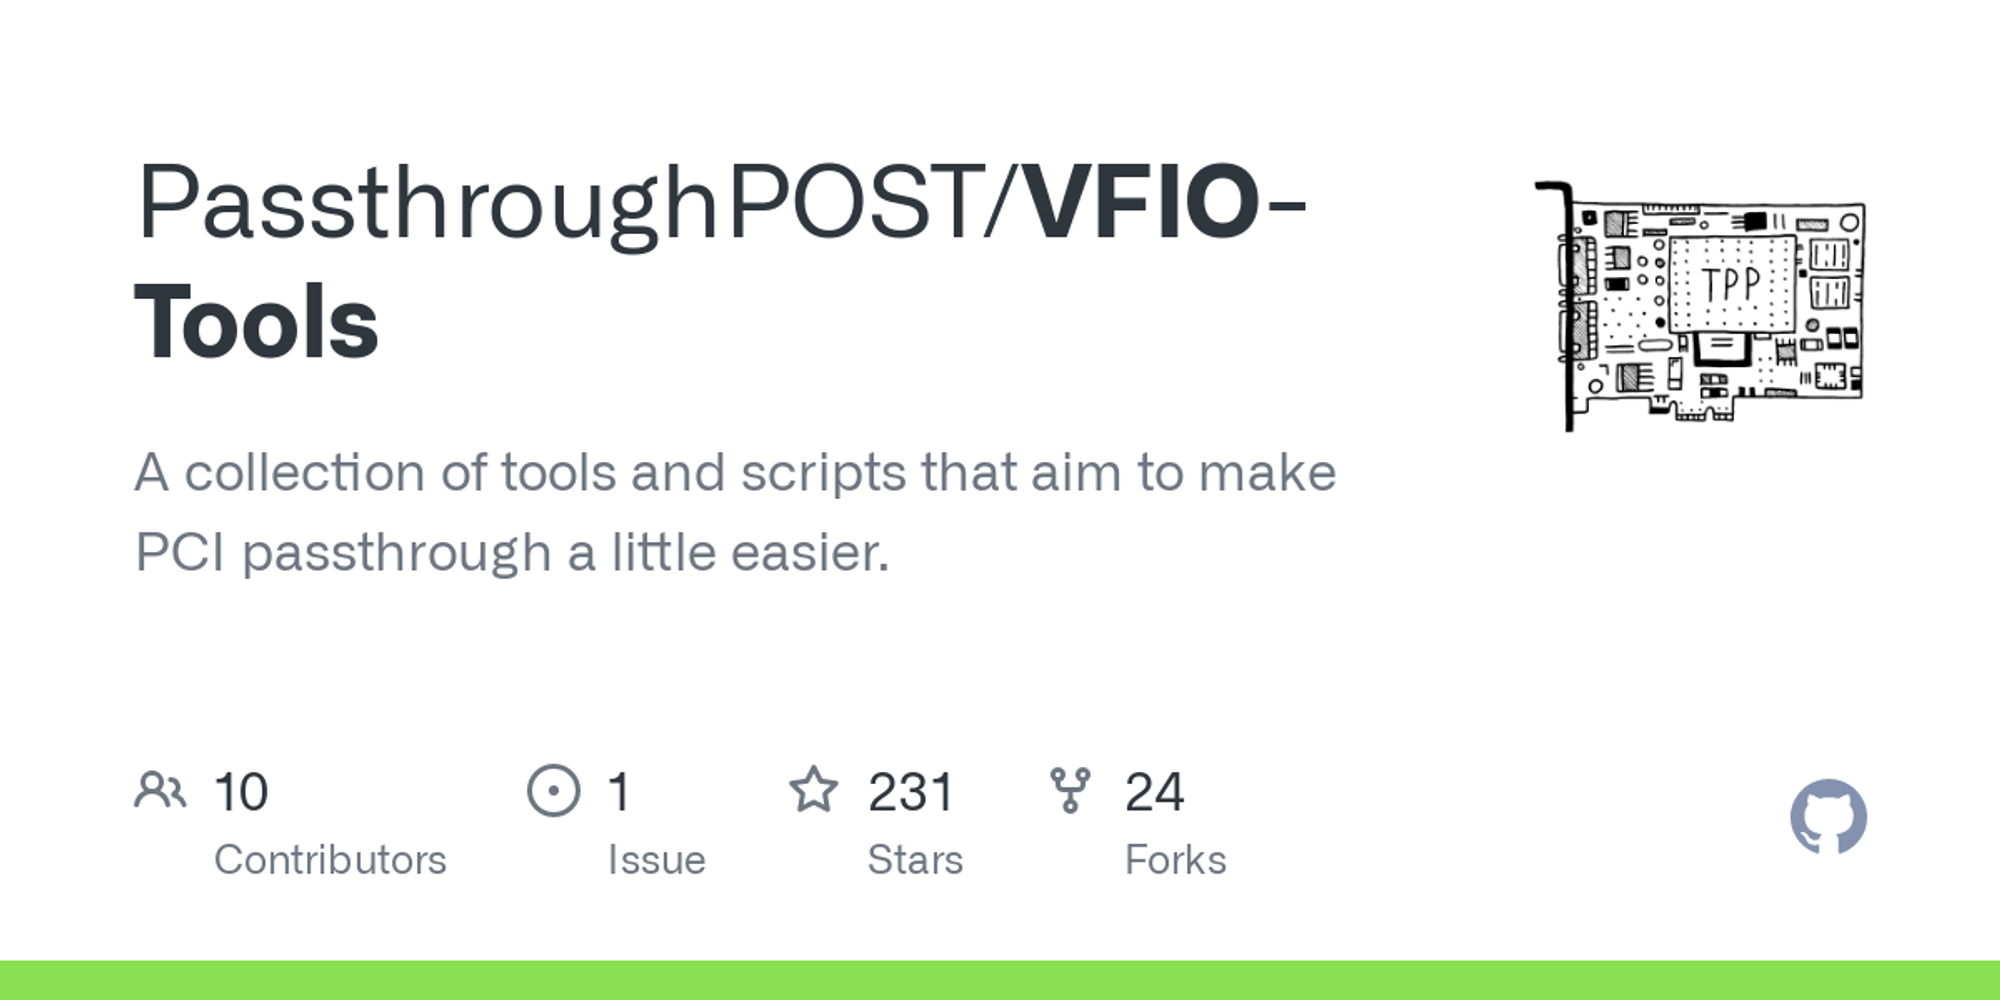 GitHub - PassthroughPOST/VFIO-Tools: A collection of tools and scripts that aim to make PCI passthrough a little easier.